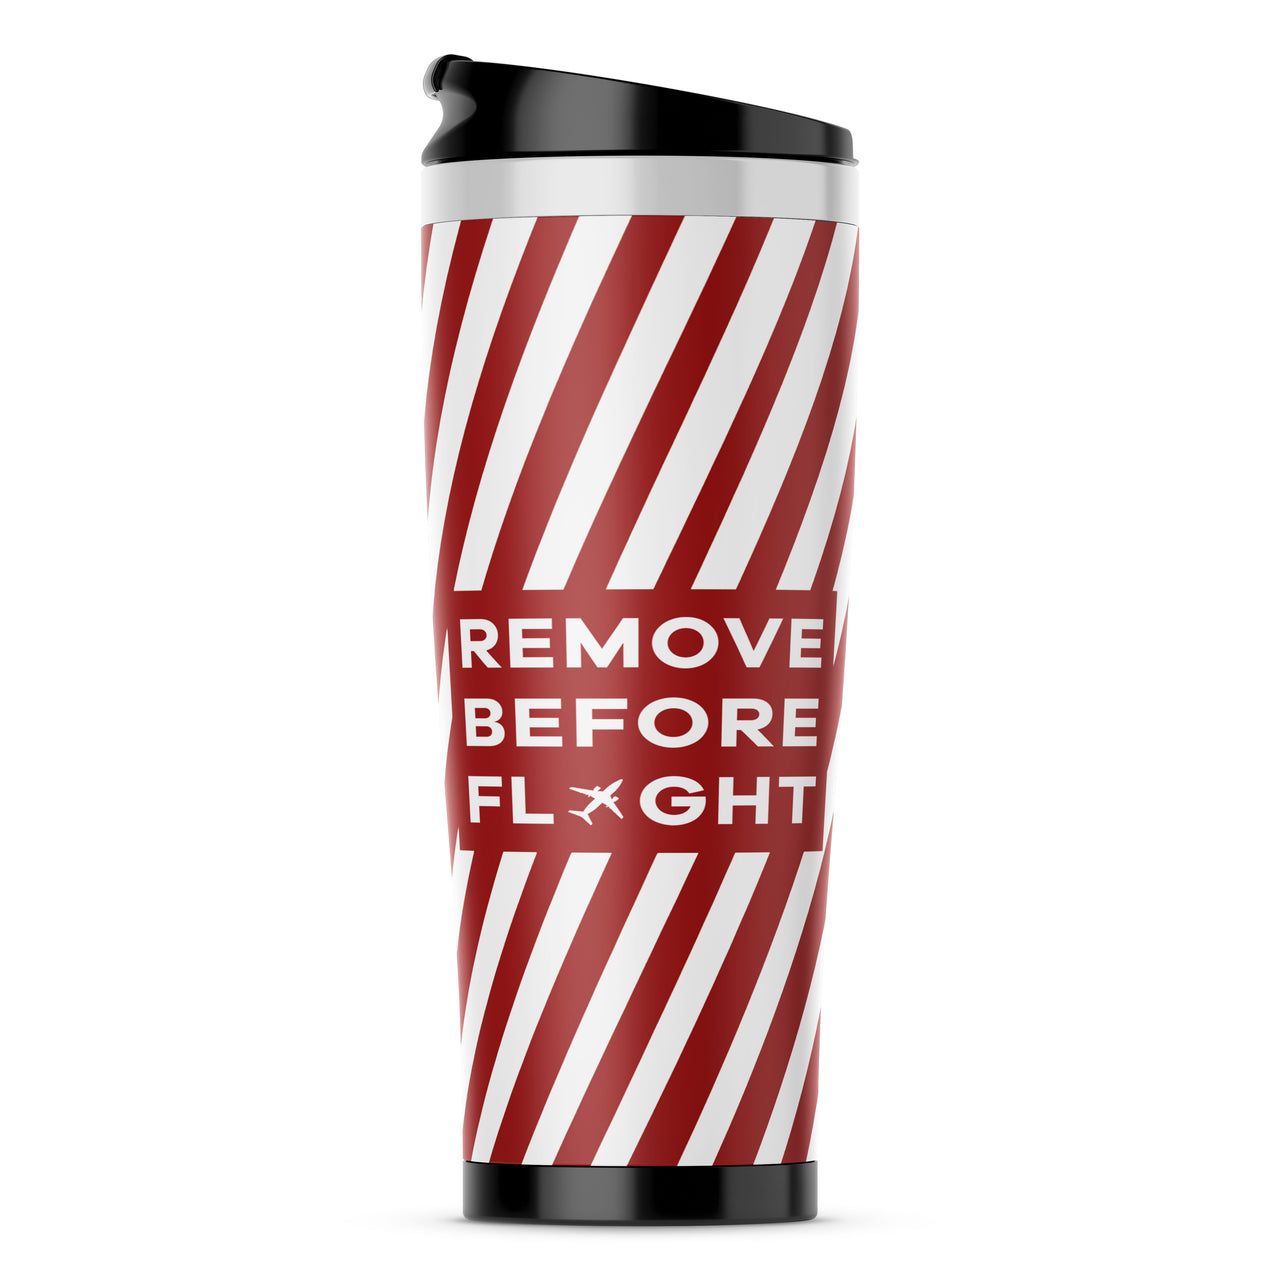 Special Edition Remove Before Flight Designed Stainless Steel Travel Mugs